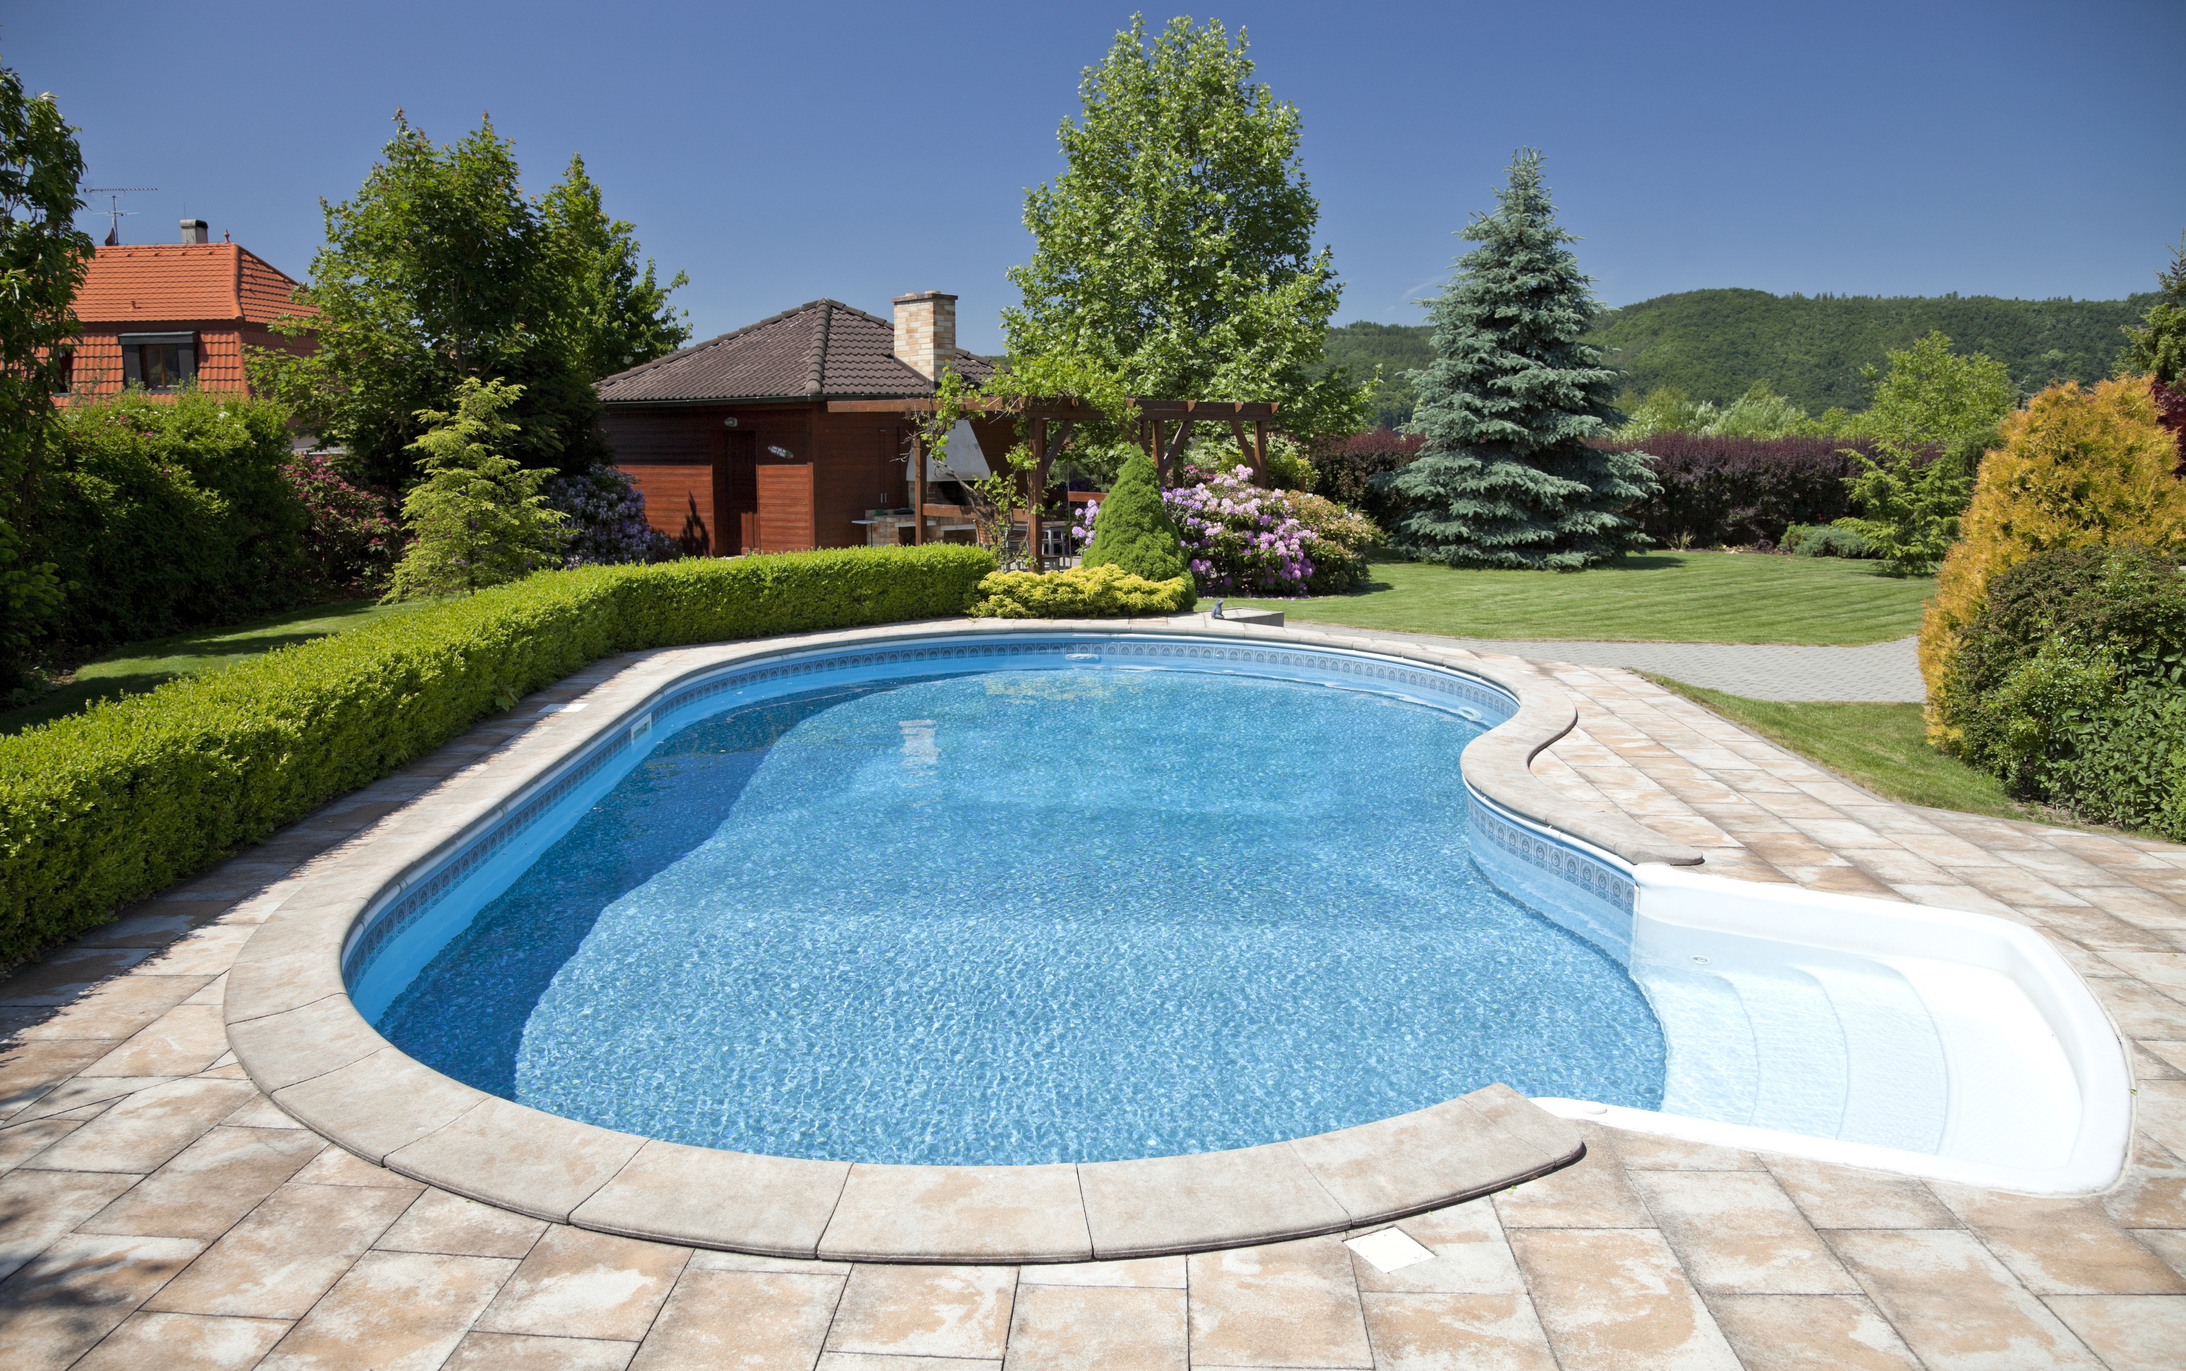 Is Your Pool Ready for Warmer Weather?